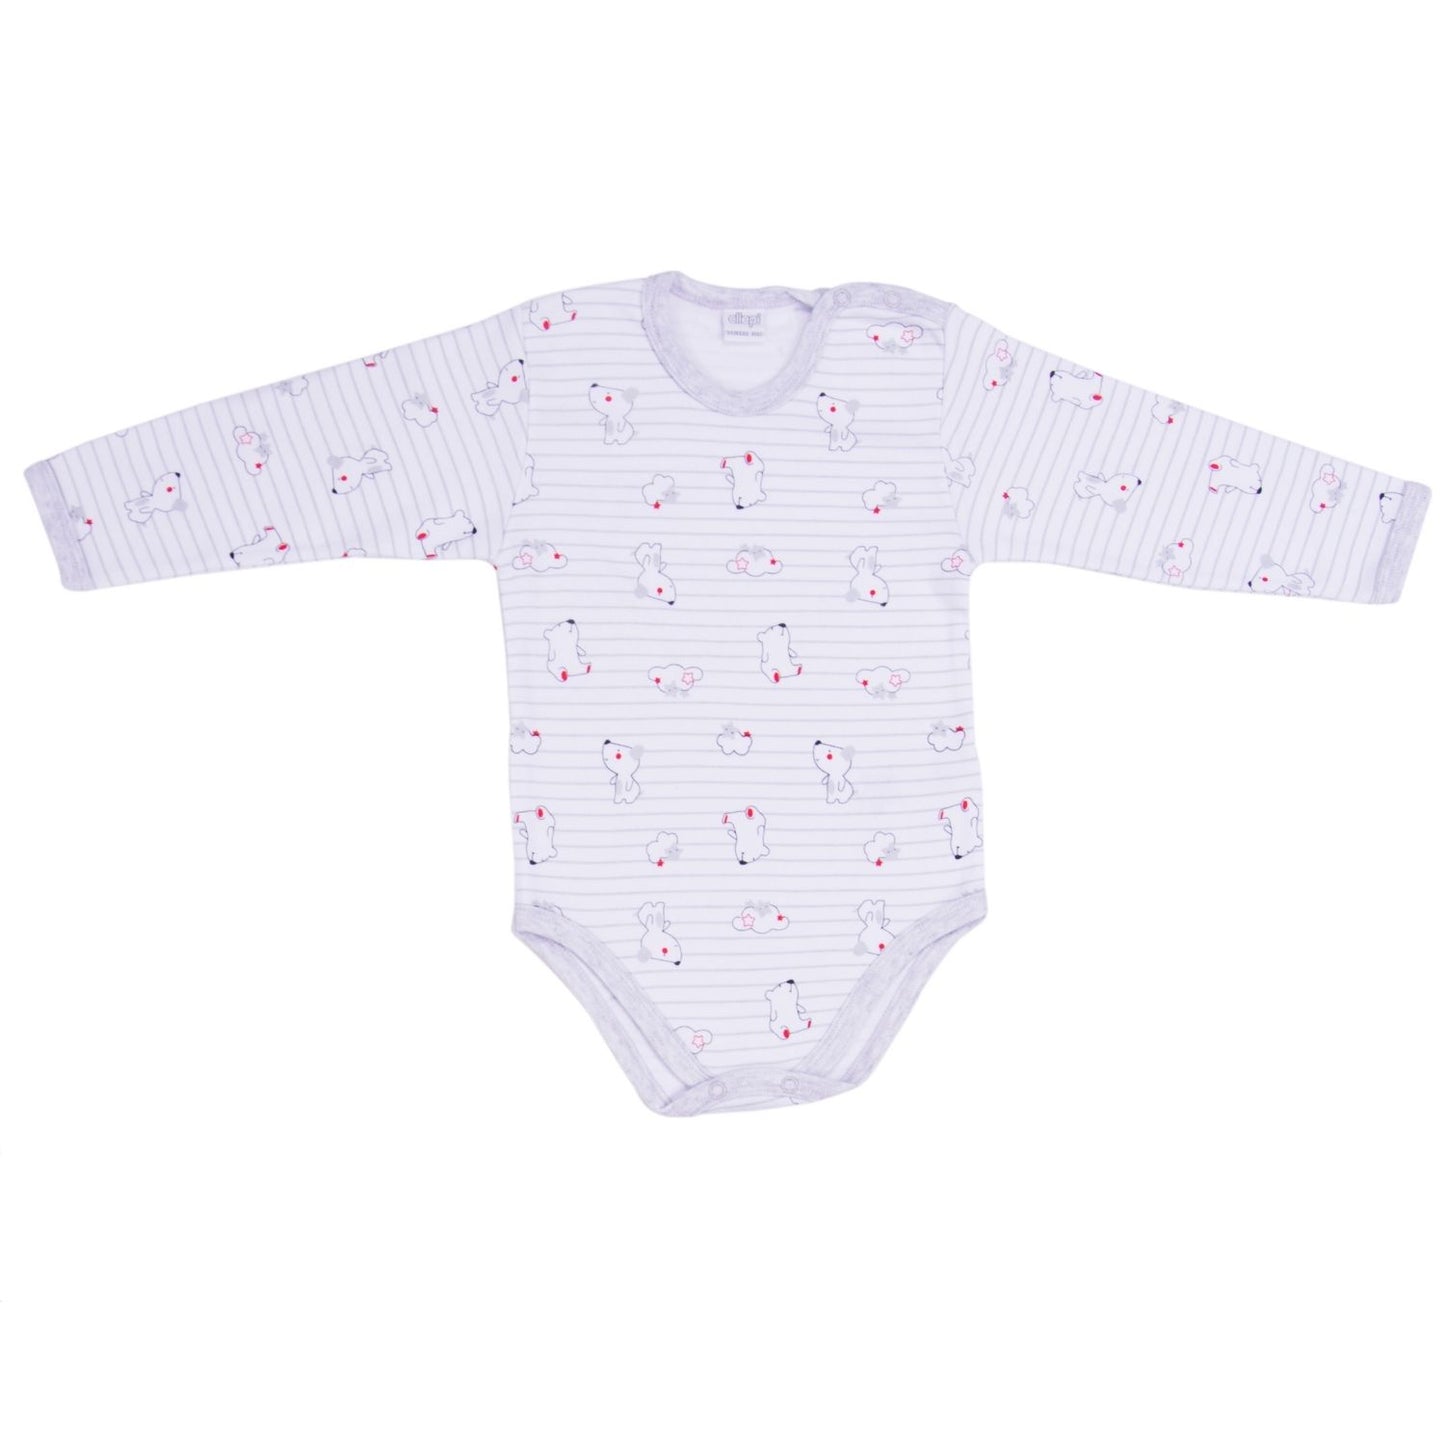 Ellepi - 2 Bodysuits with opening on the shoulder and long sleeves, 100% gray cotton